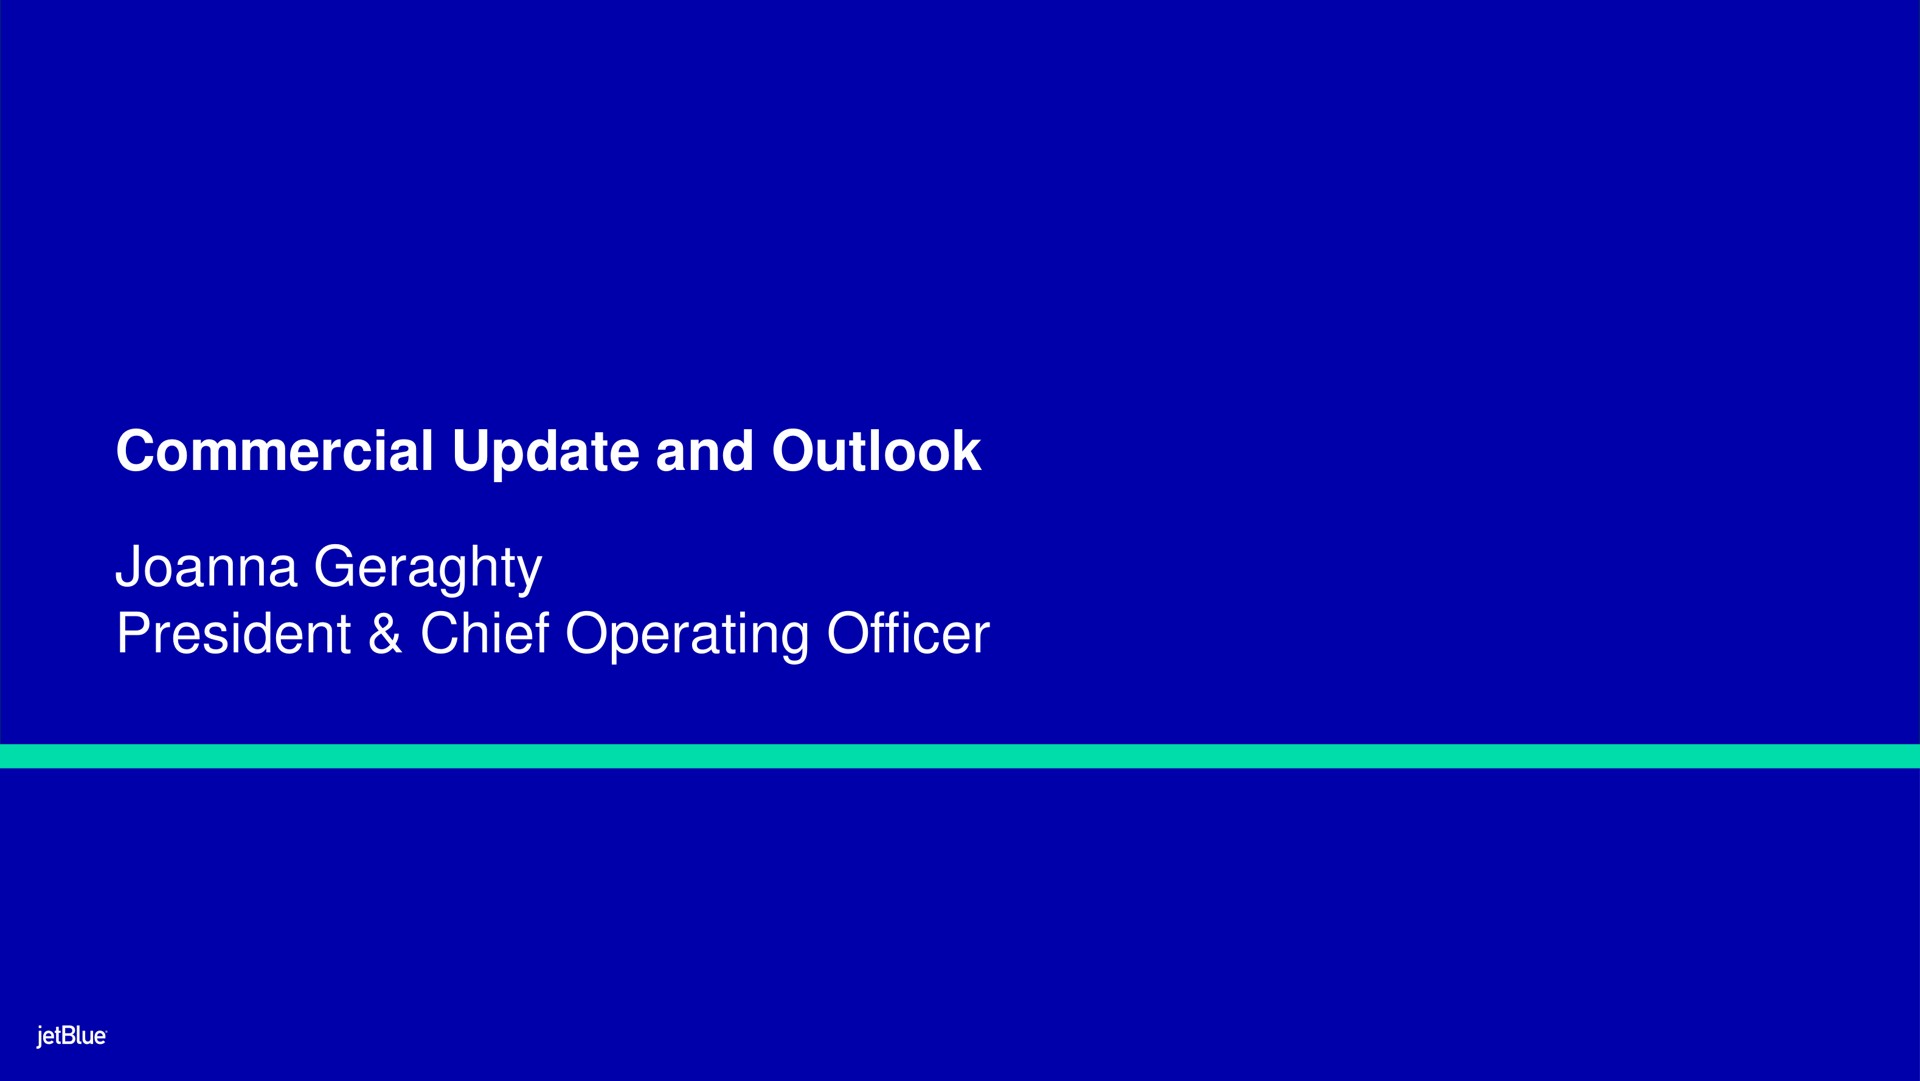 commercial update and outlook president chief operating officer | jetBlue